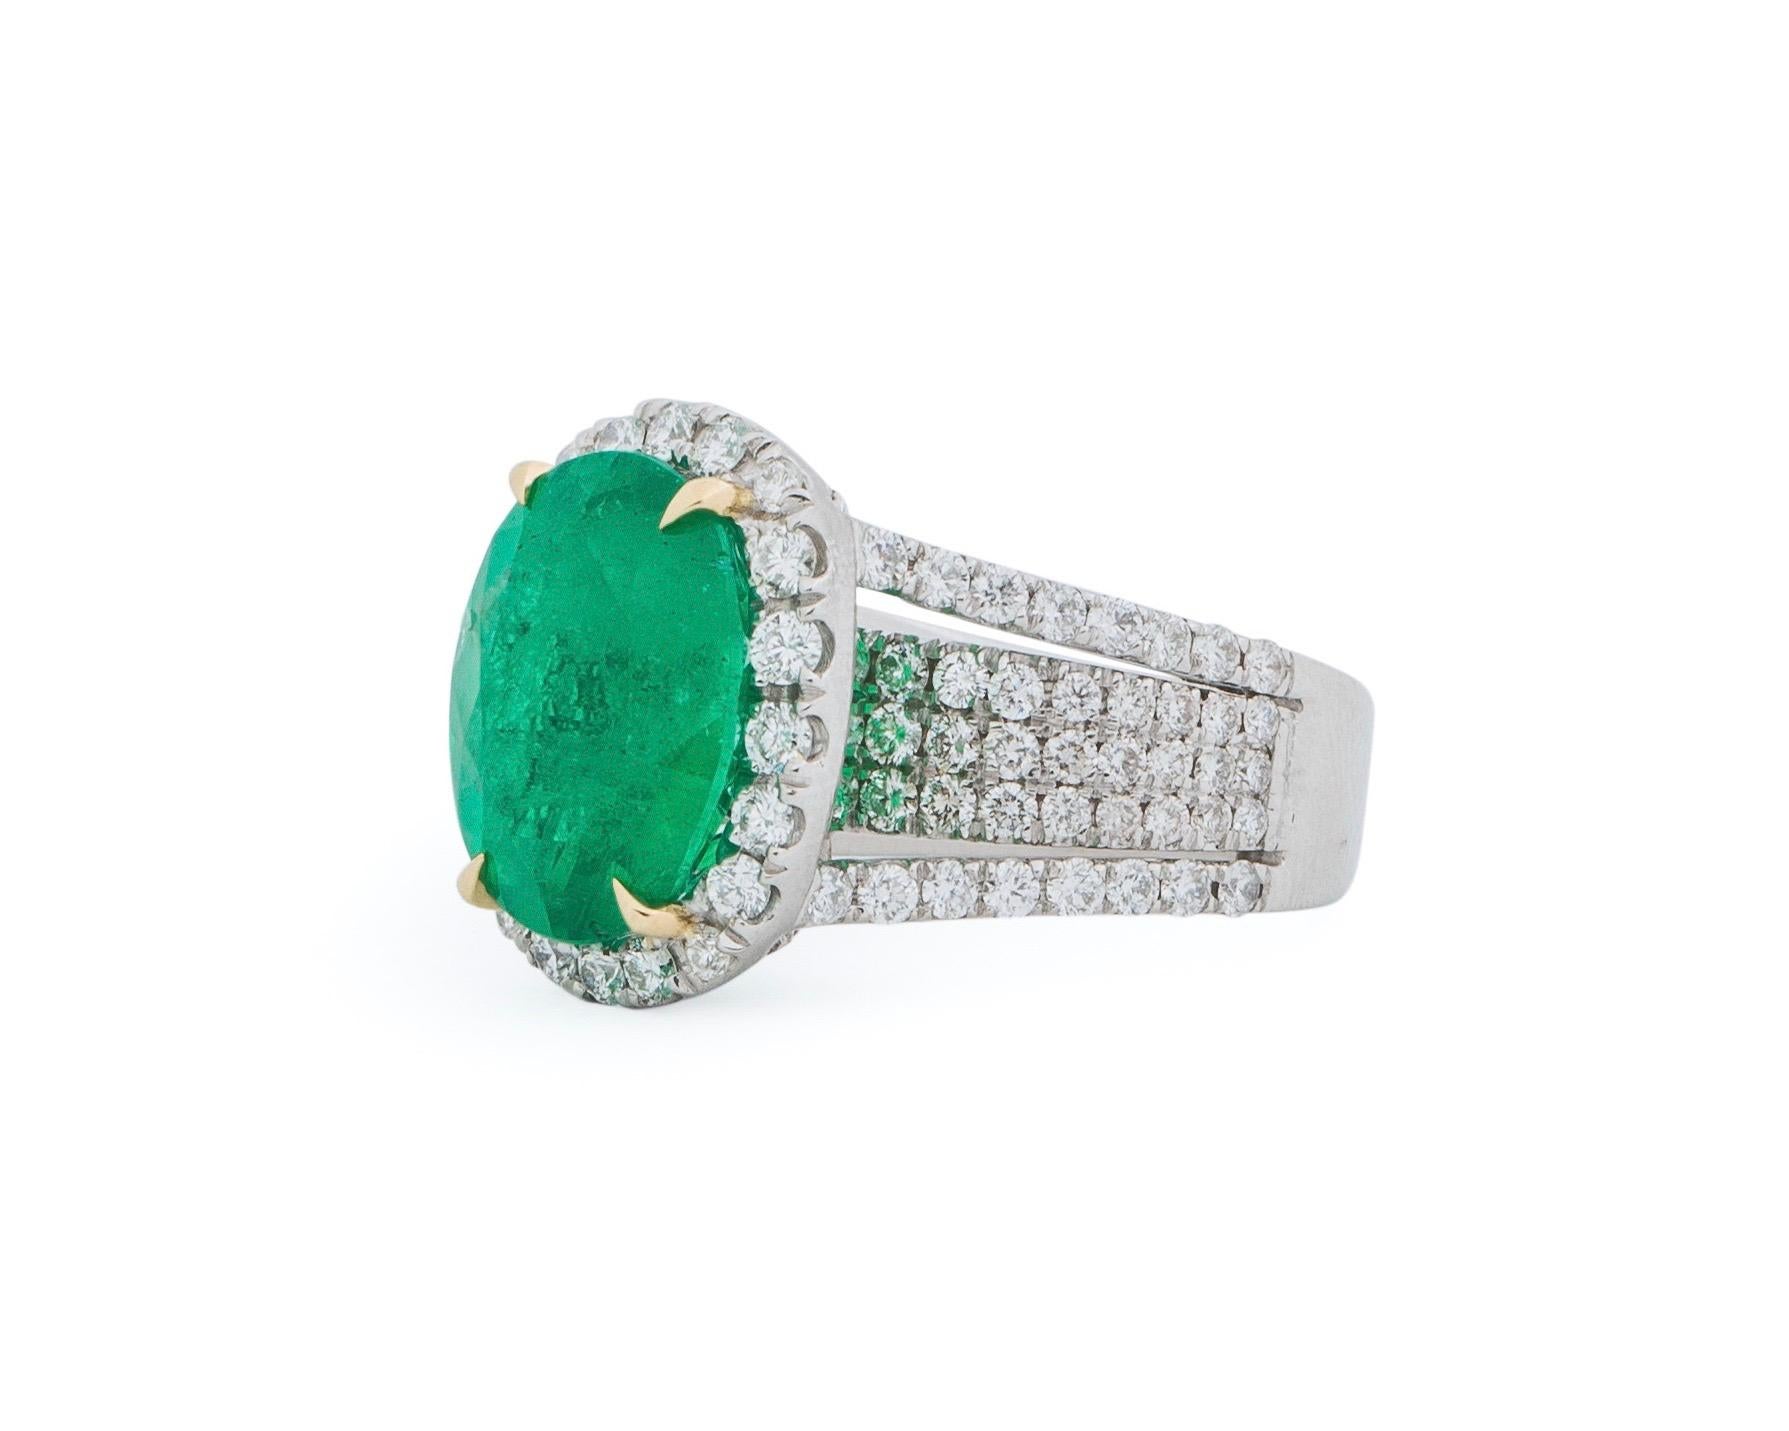 This incredible GIA Certified Colombian Emerald ring is a true treasure . The oval cut emerald weighs 7.09 carats and measures 14.47 x 11.78 x 7.82 mm. It has the desirable green color that is so mesmerizing. An excellent statement piece. The